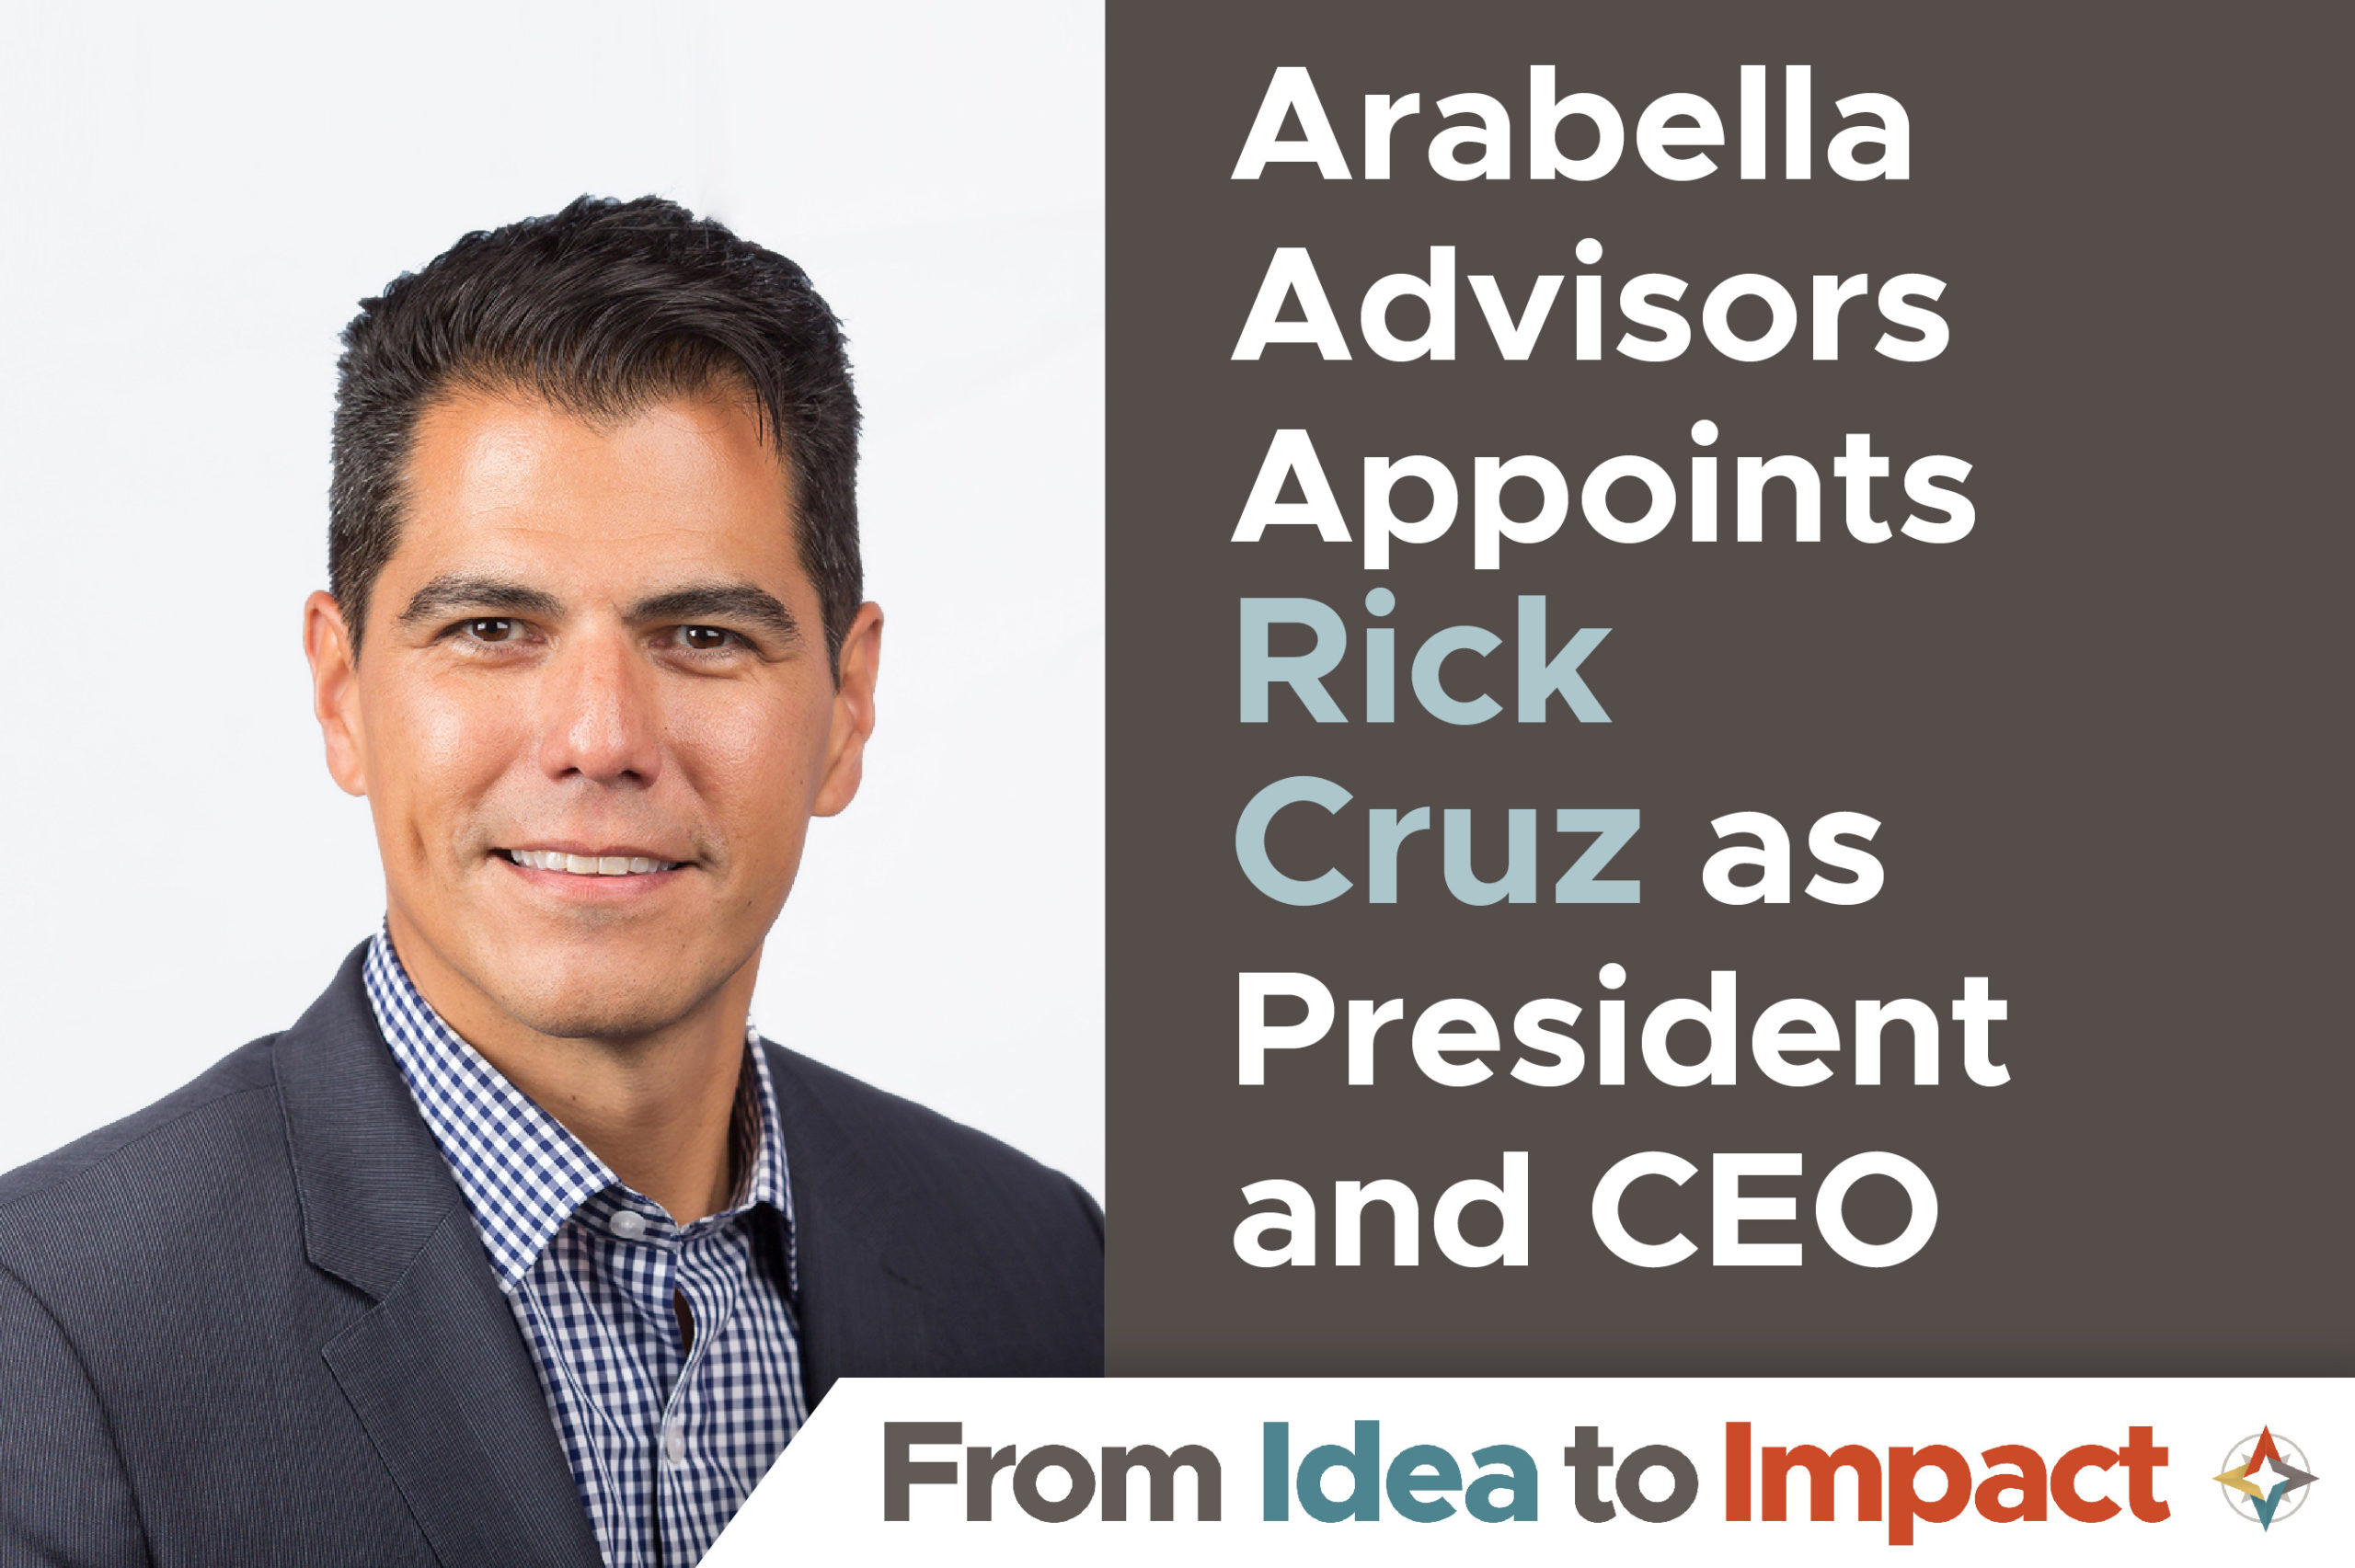 Arabella Advisors Appoints Rick Cruz as President and CEO